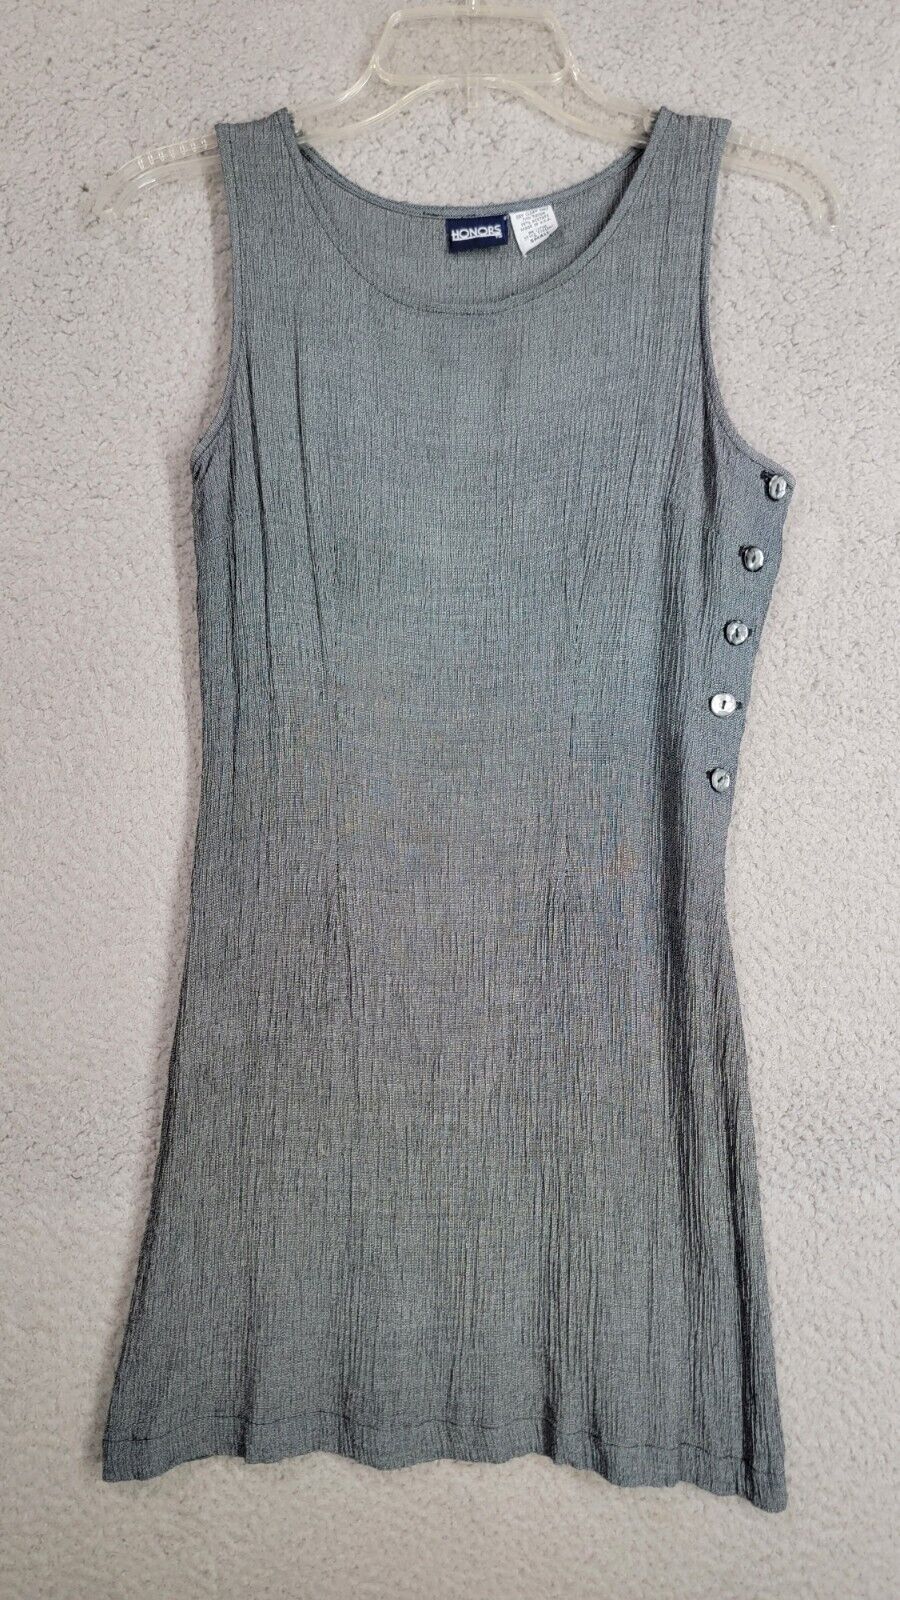 Vintage 90s Sheath Dress Small Grey Honors Sleeveless Casual Button Side